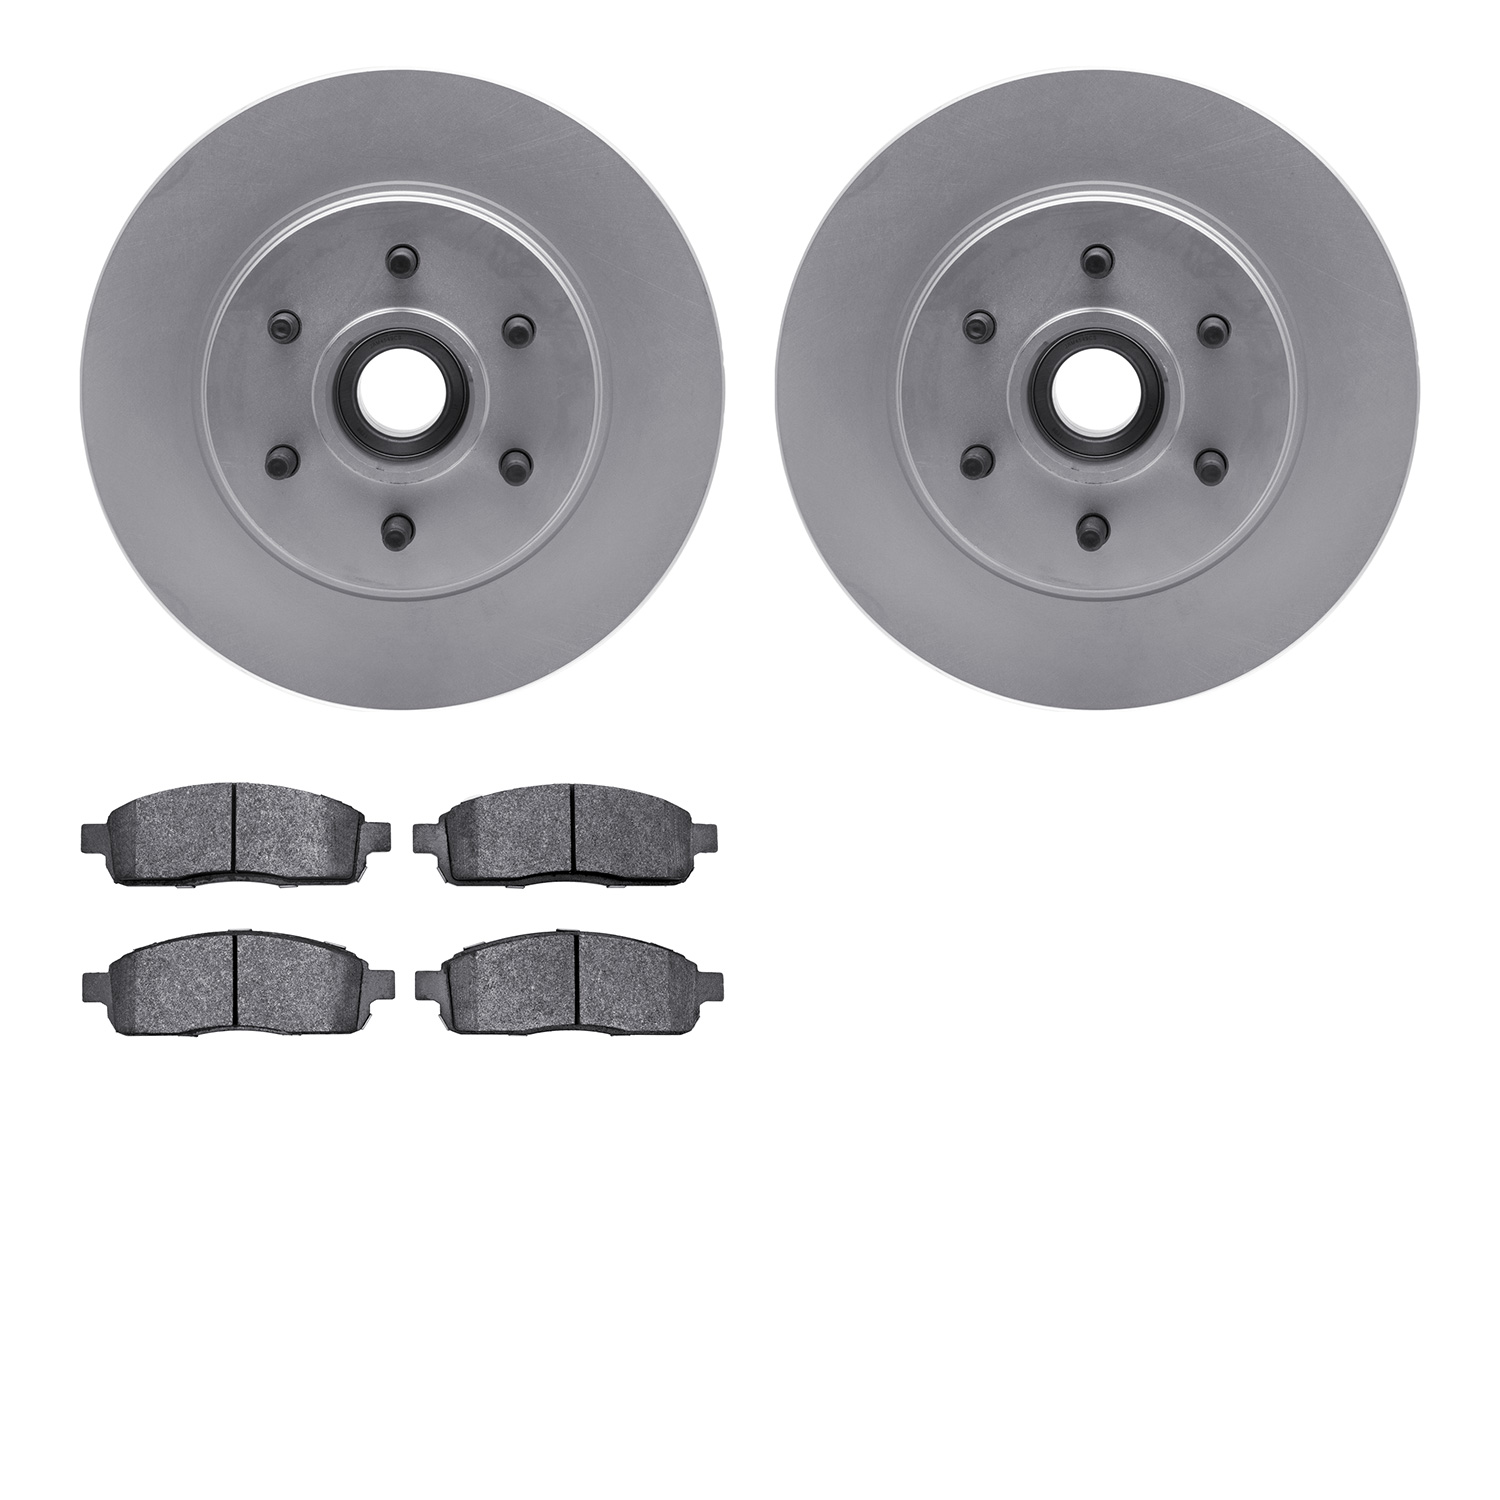 4402-54045 Geospec Brake Rotors with Ultimate-Duty Brake Pads Kit, 2004-2008 Ford/Lincoln/Mercury/Mazda, Position: Front